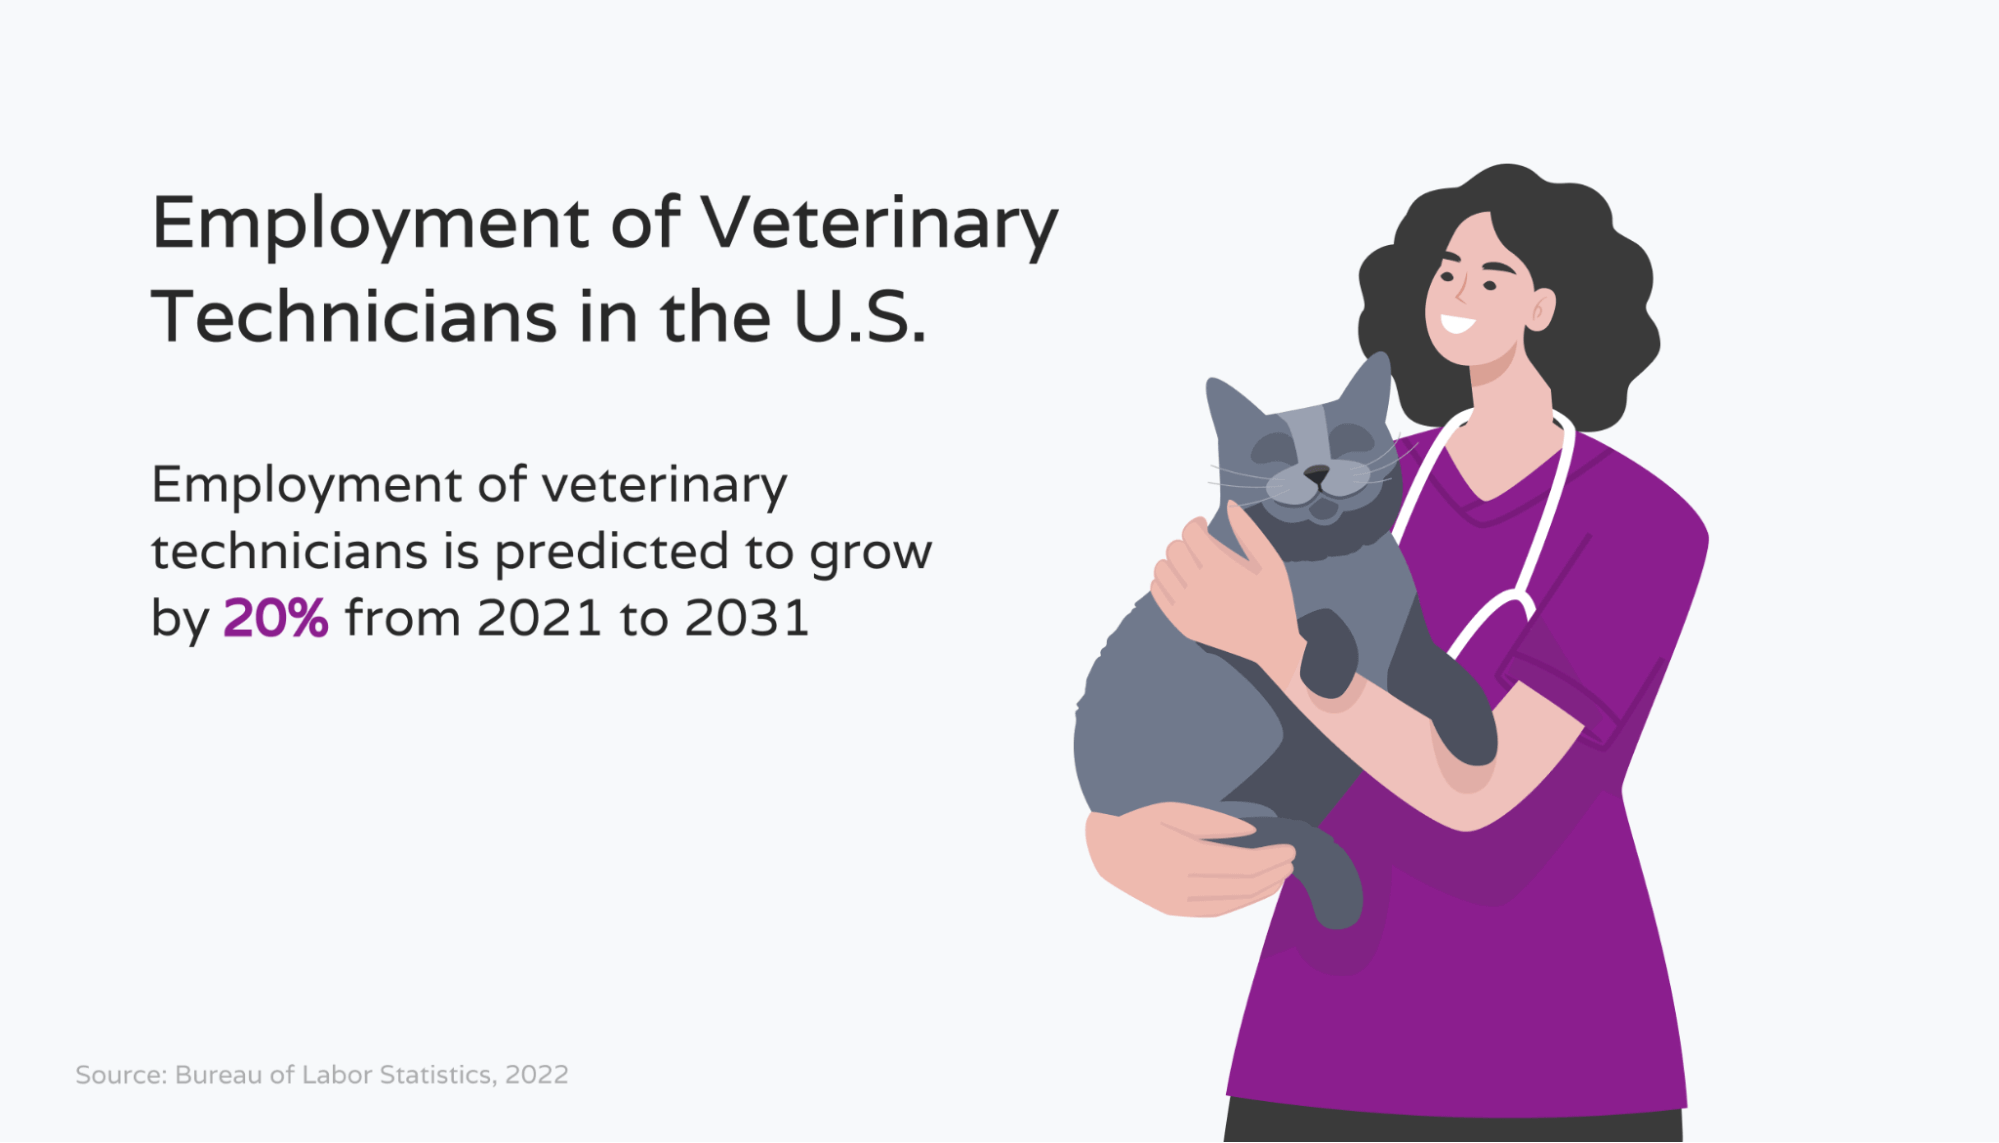 Employment rate of veterinary technicians from 2021 to 2031